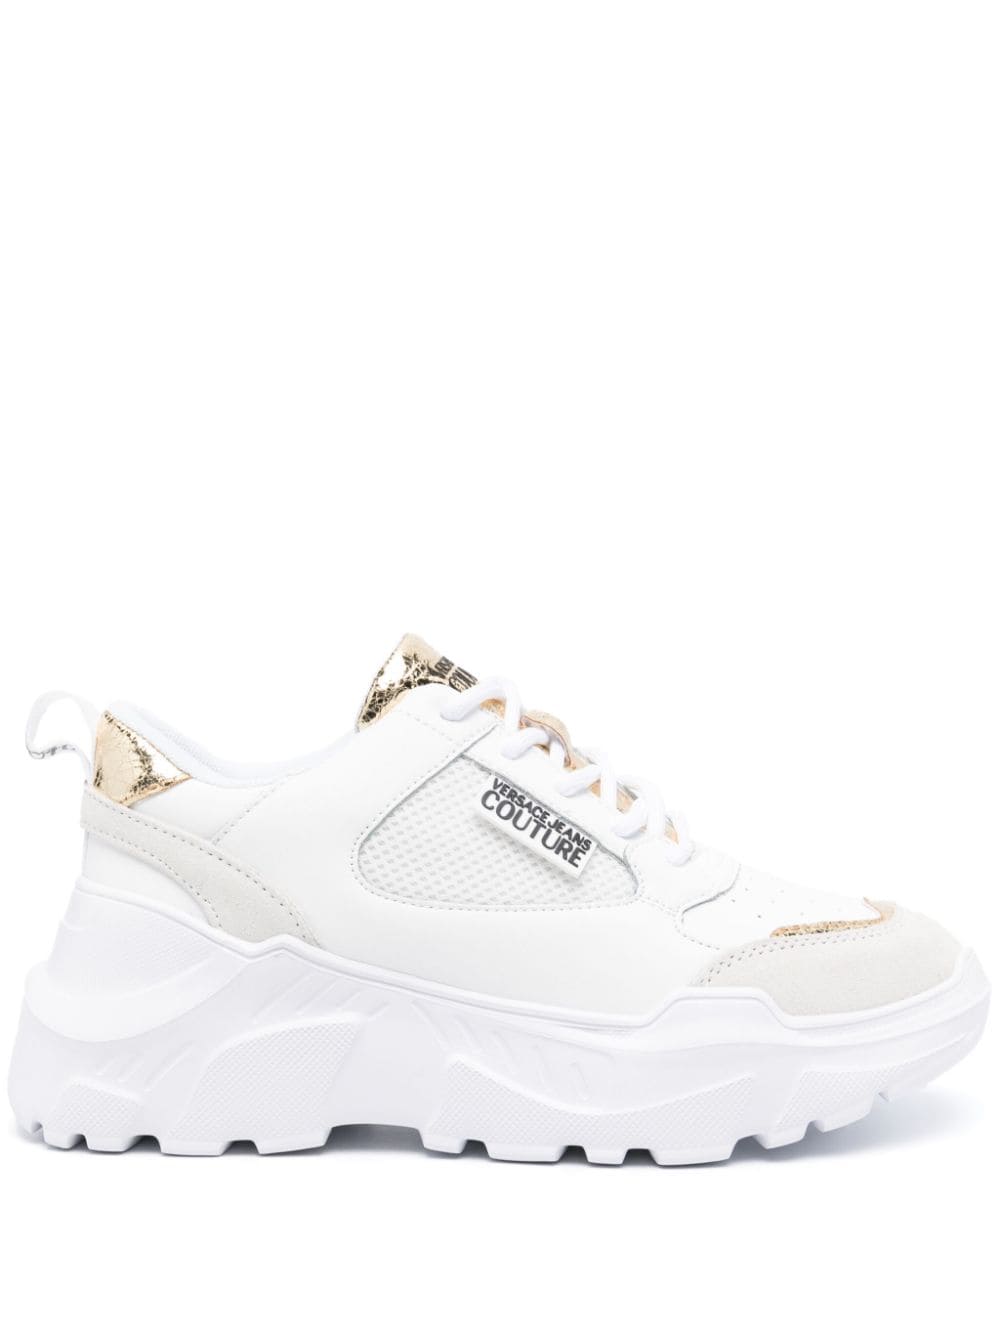 Versace Jeans Couture Speedtrack chunky sneakers - White von Versace Jeans Couture